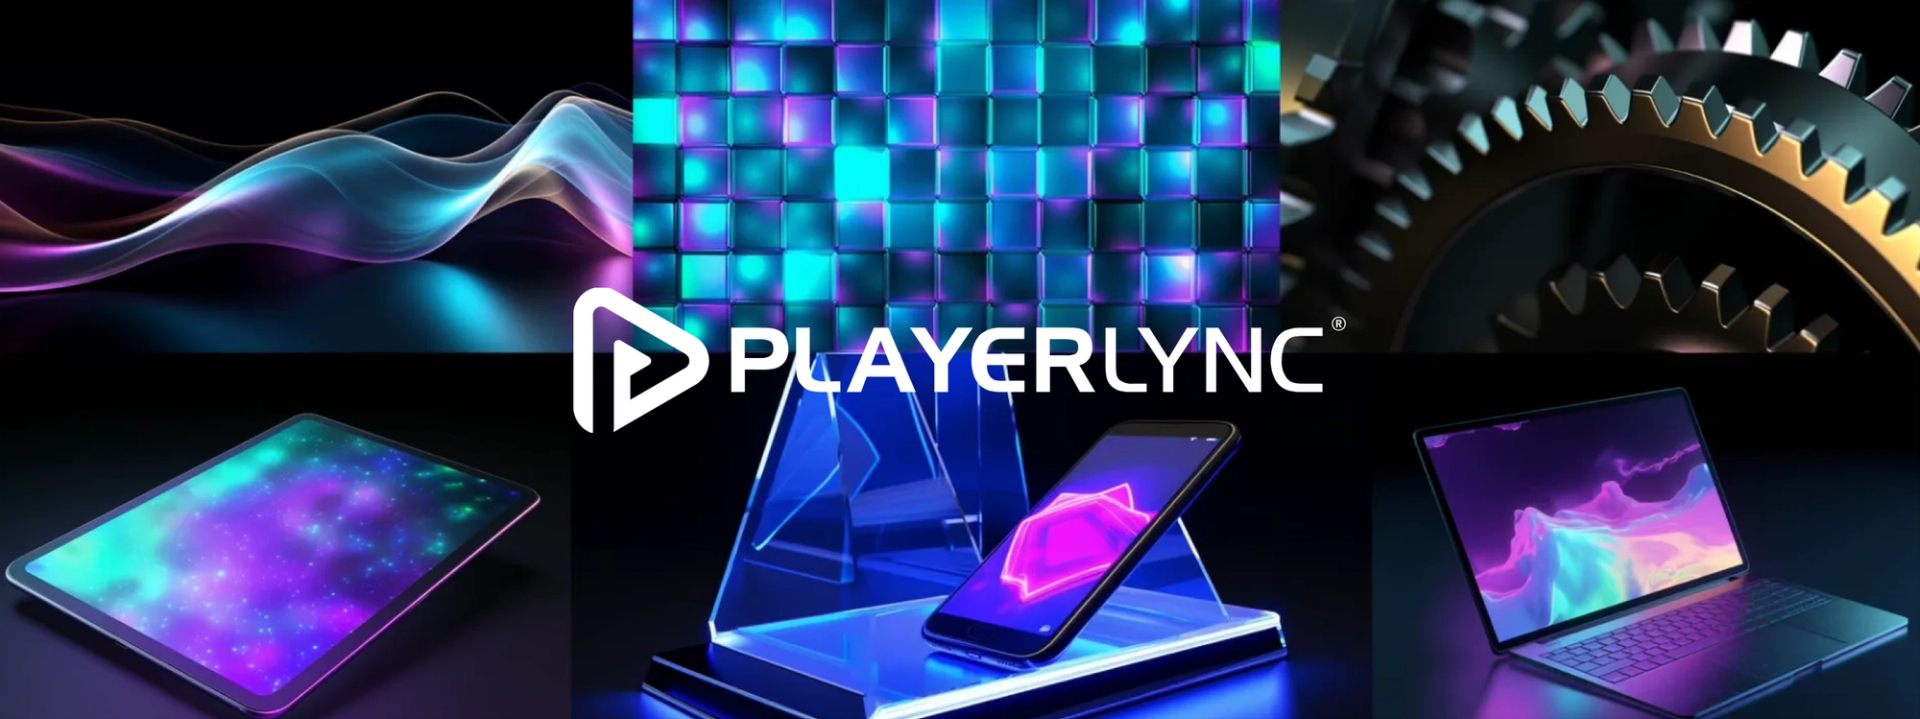 PlayerLync and Superside Transform Mobile Workforce Engagement with AI-Driven Design